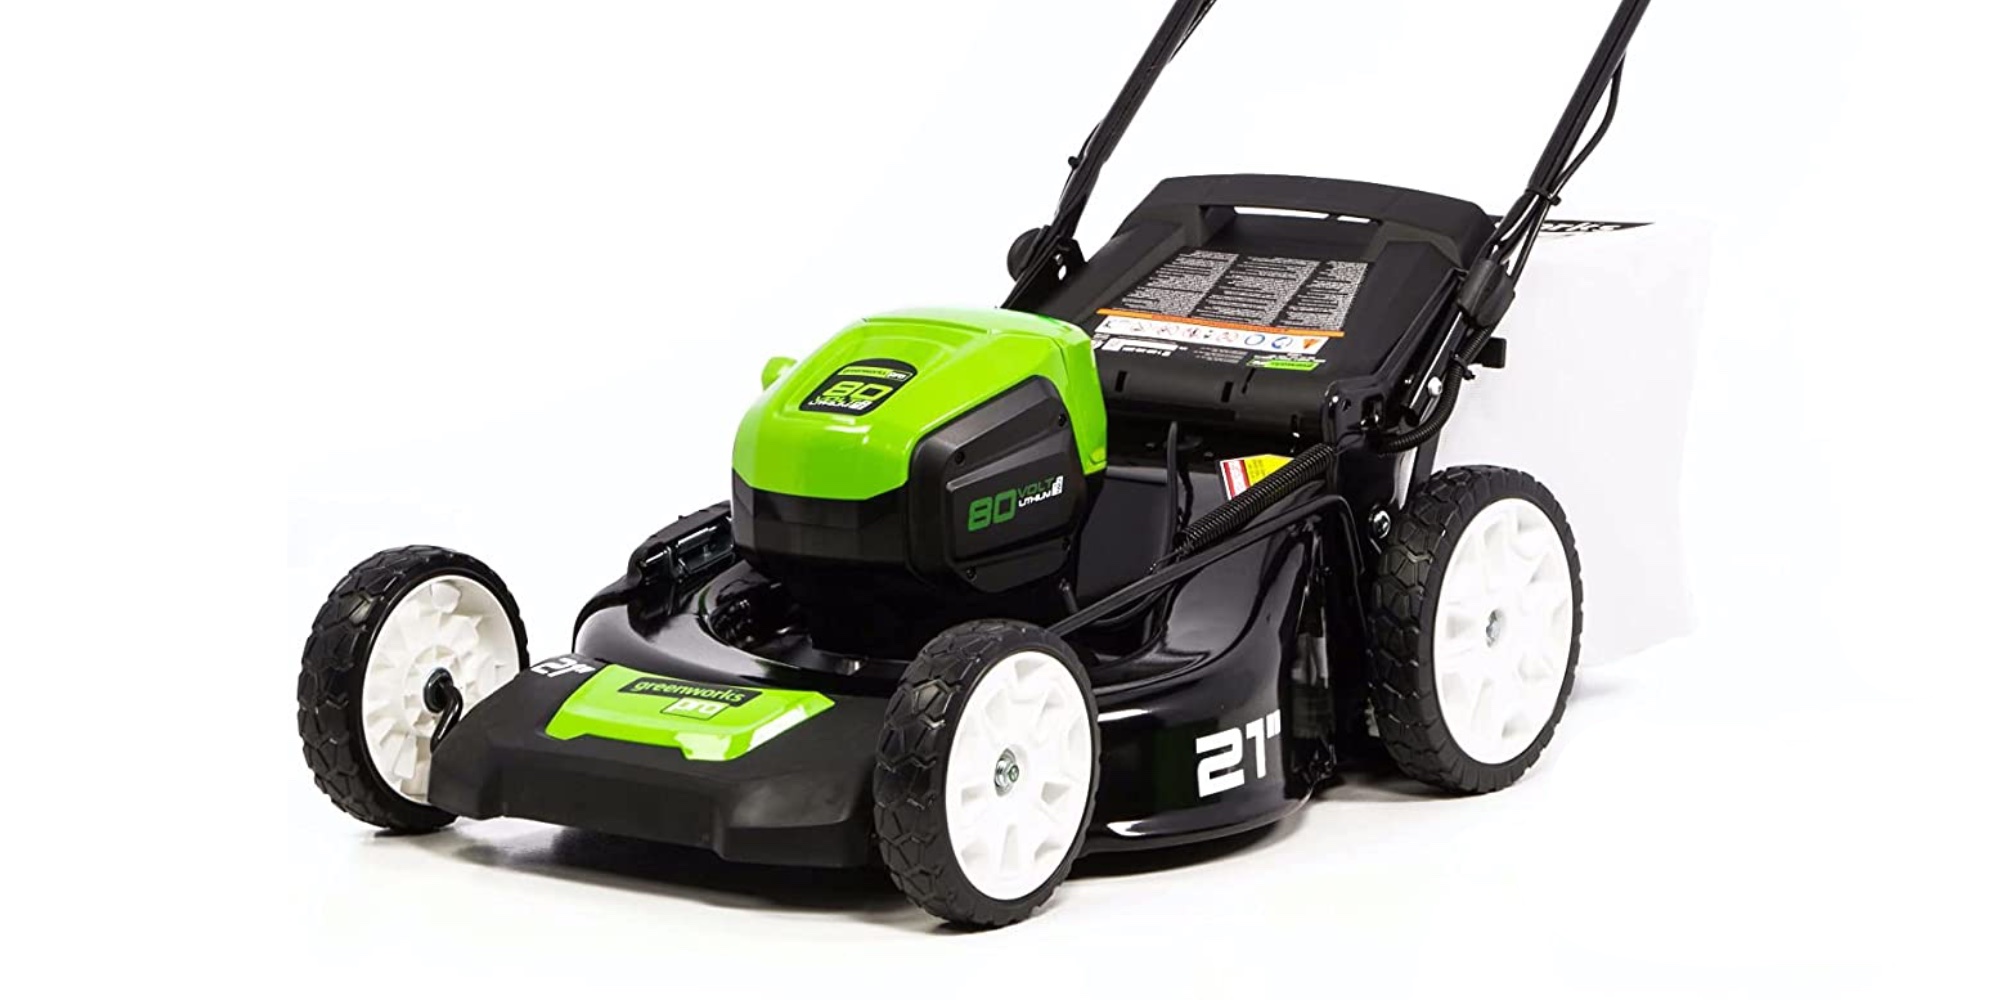 Greenworks Pro 80V 21inch selfpropelled electric mower now up to 227